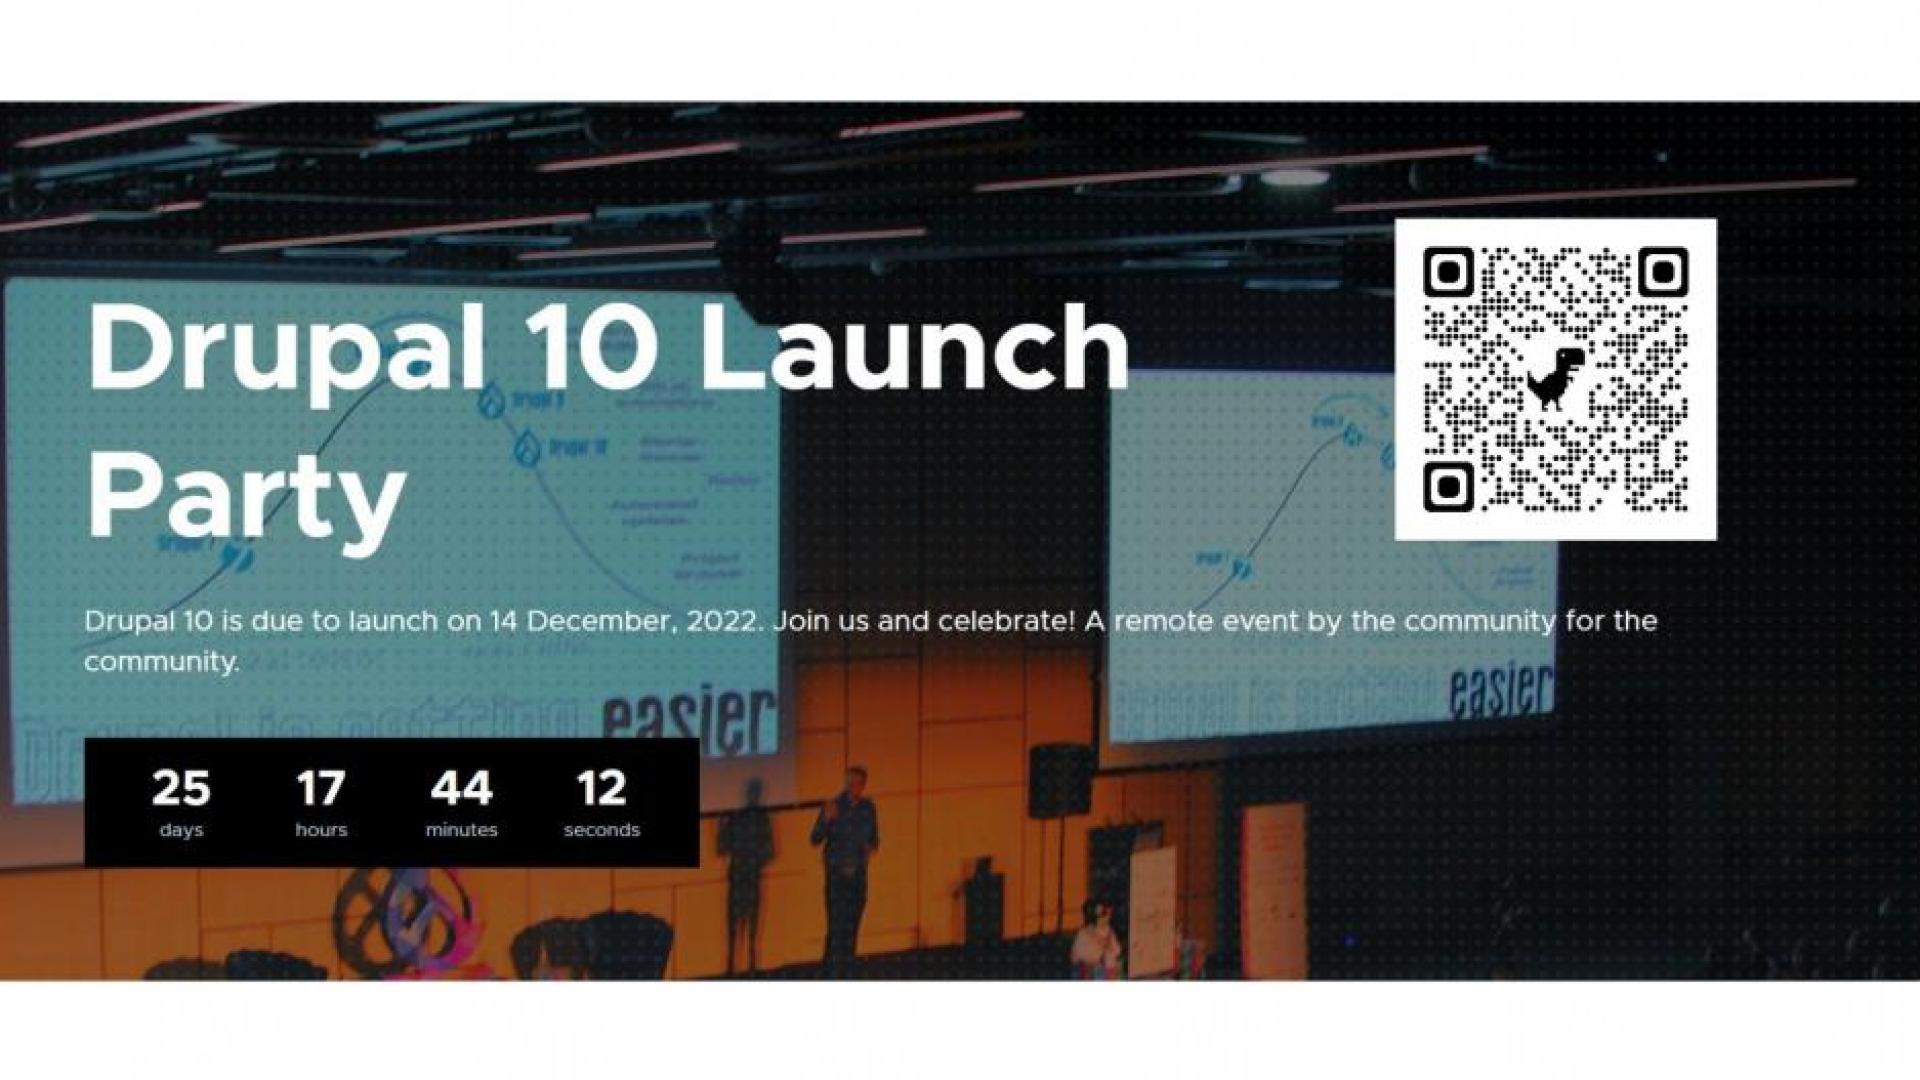 Open Google To scan QR code to access live Drupal 10 Countdown 